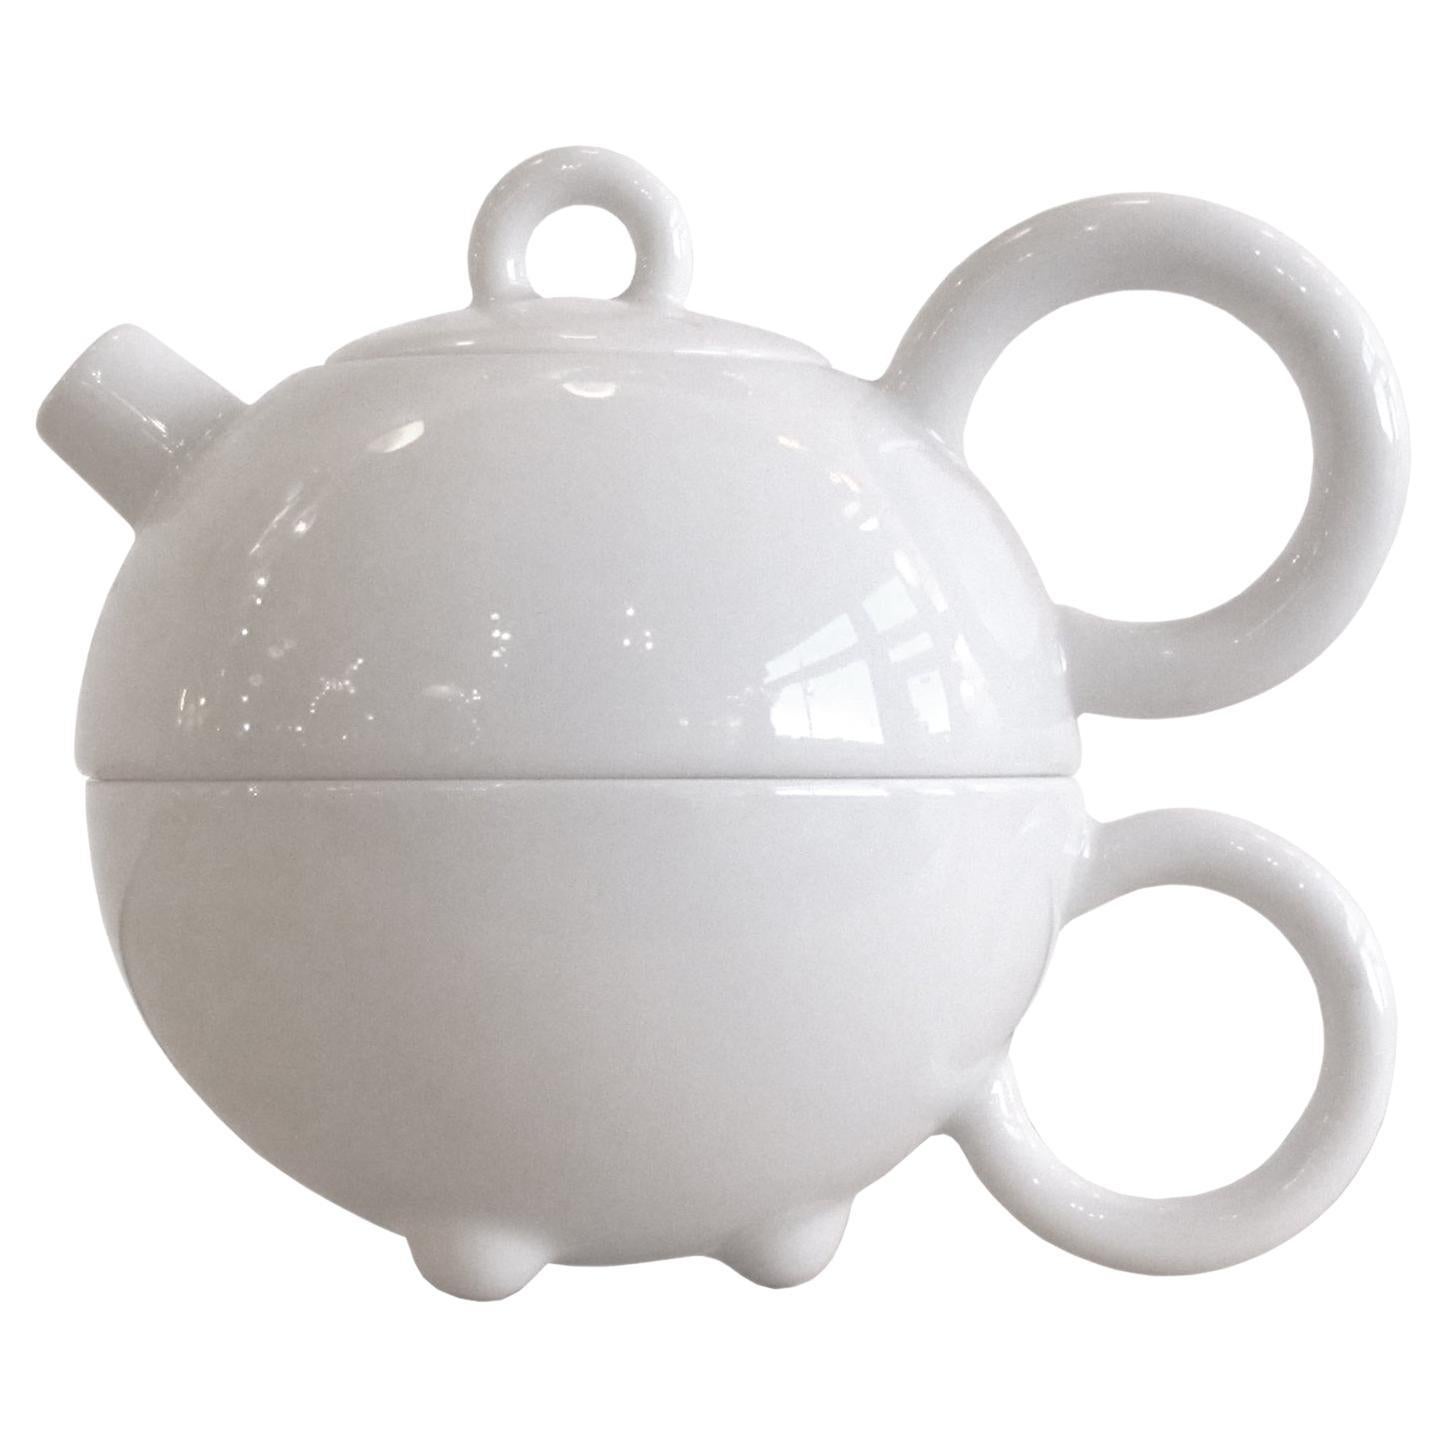 Matteo Thun for Arzberg Tea-for-One Set, 1980 For Sale